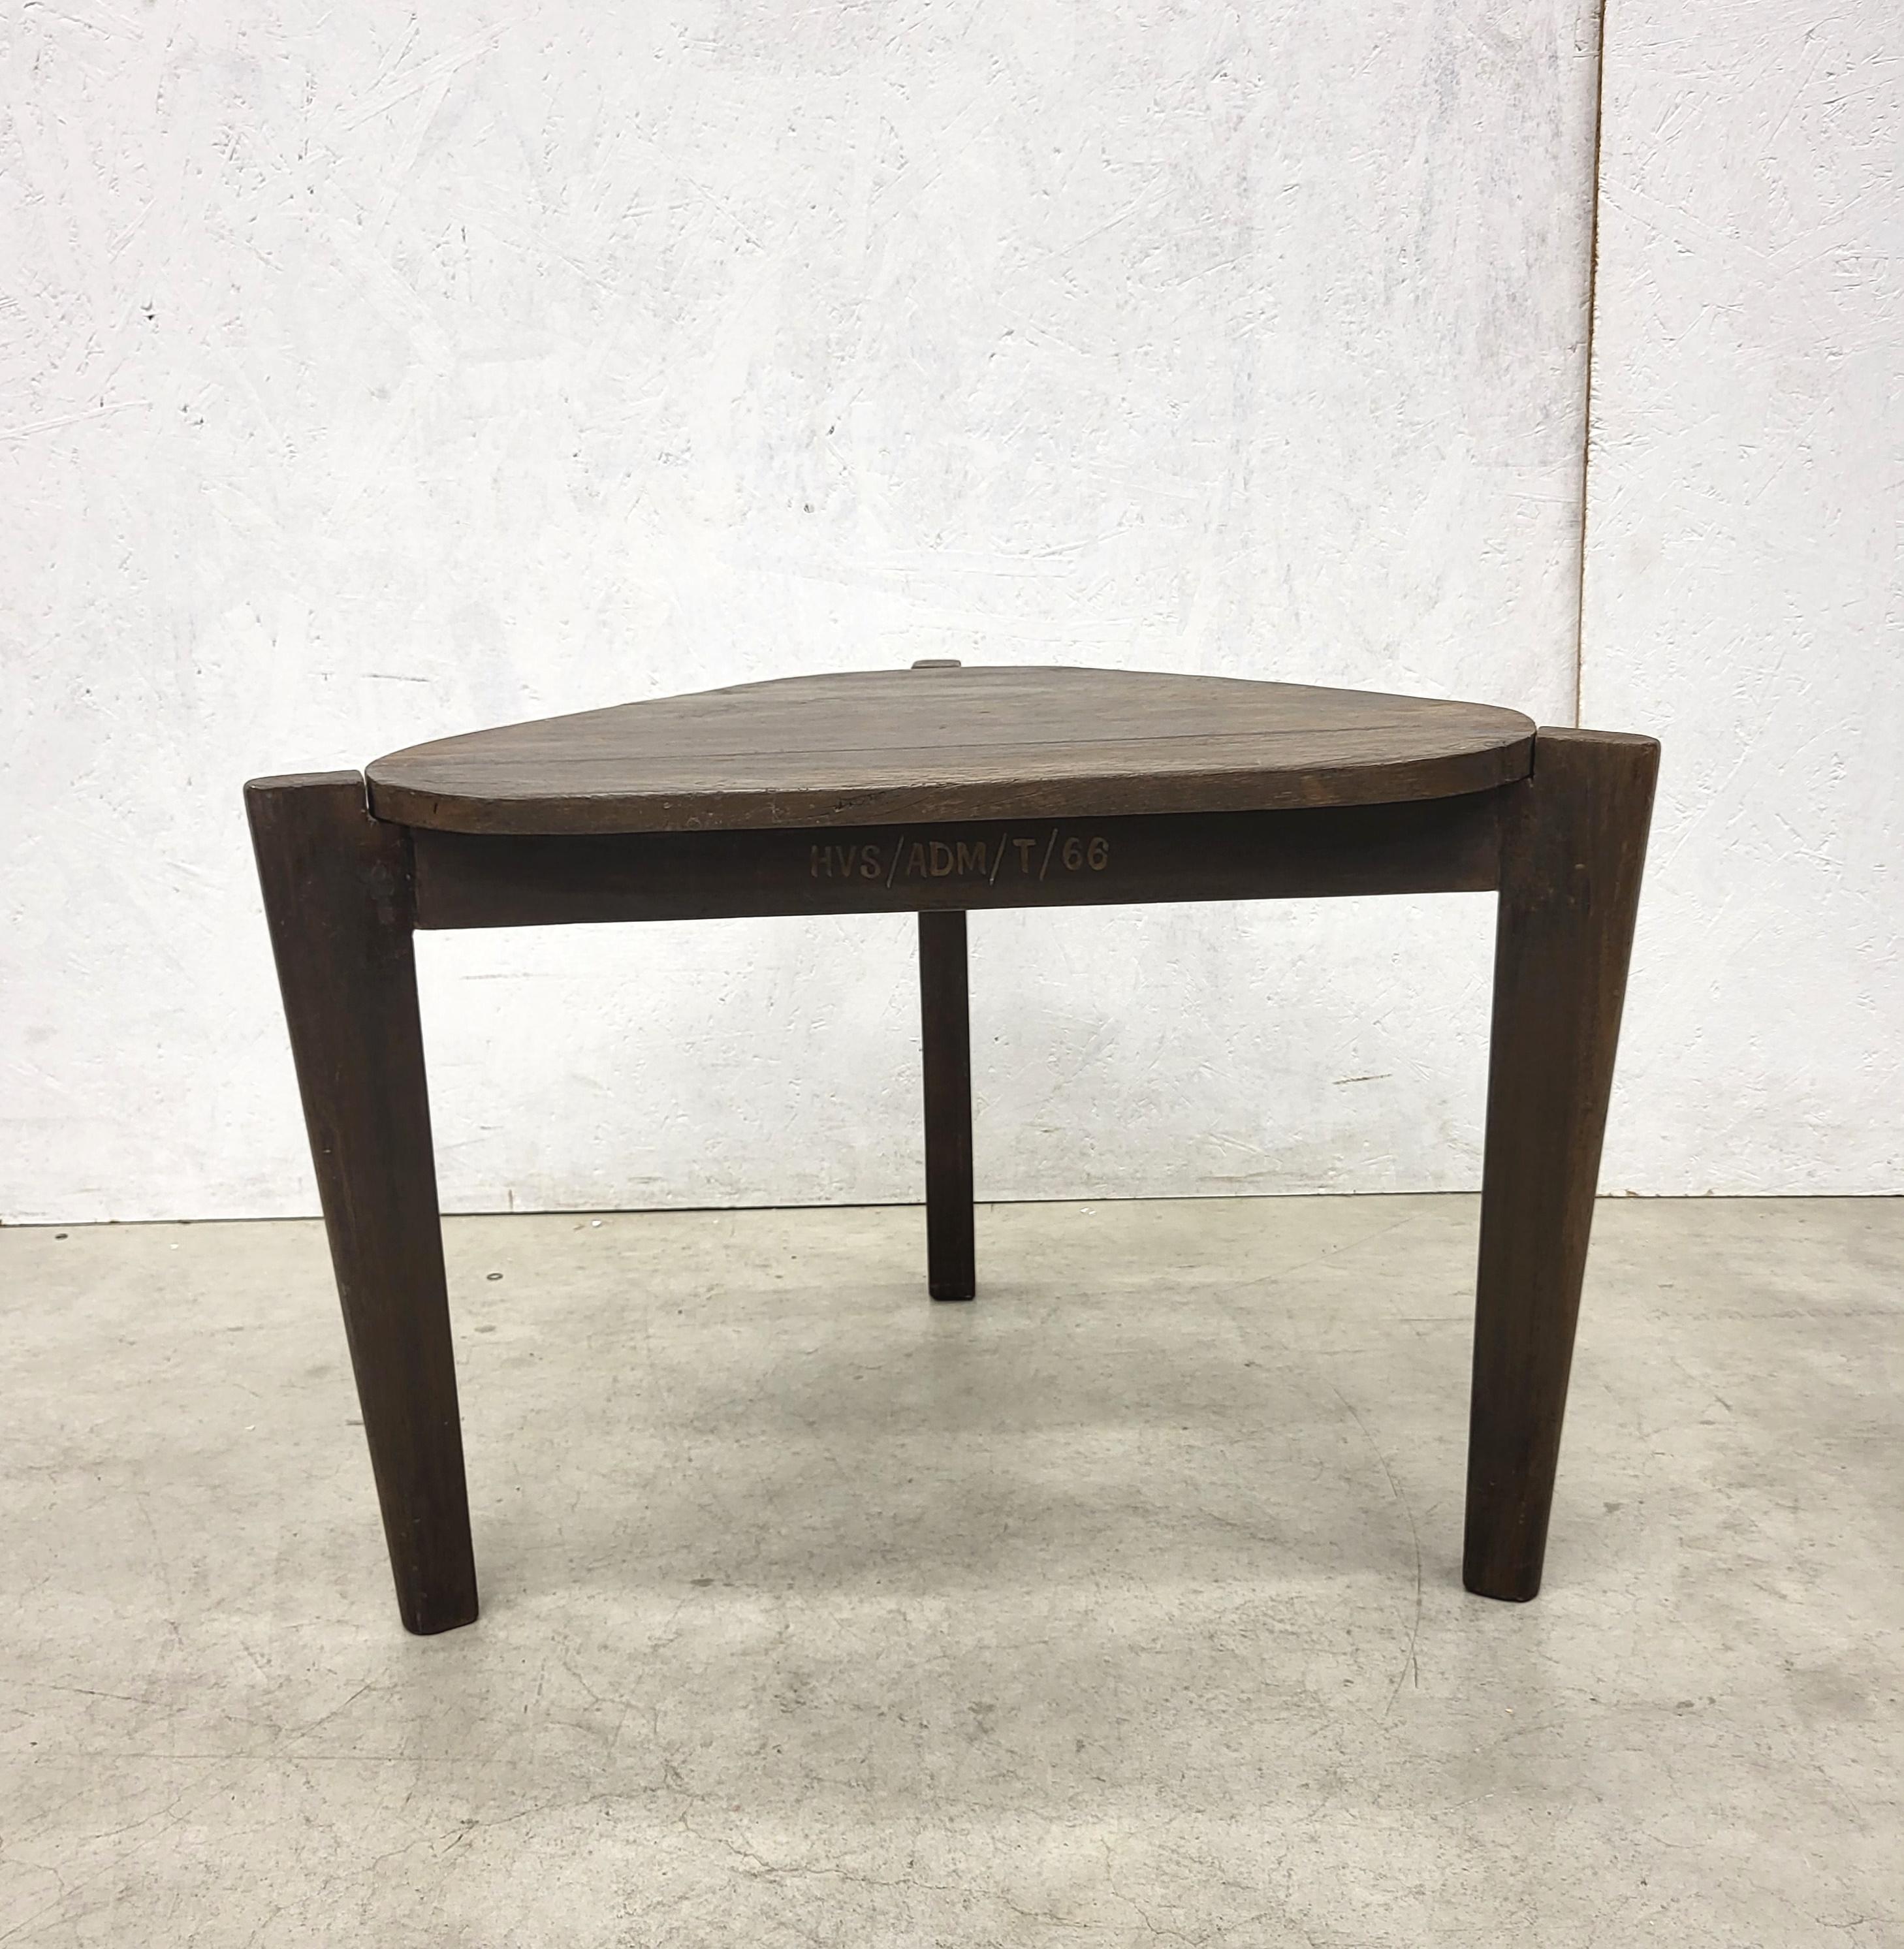 Hand-Crafted Pierre Jeanneret Chandigarh Coffee Table, India 1960 For Sale